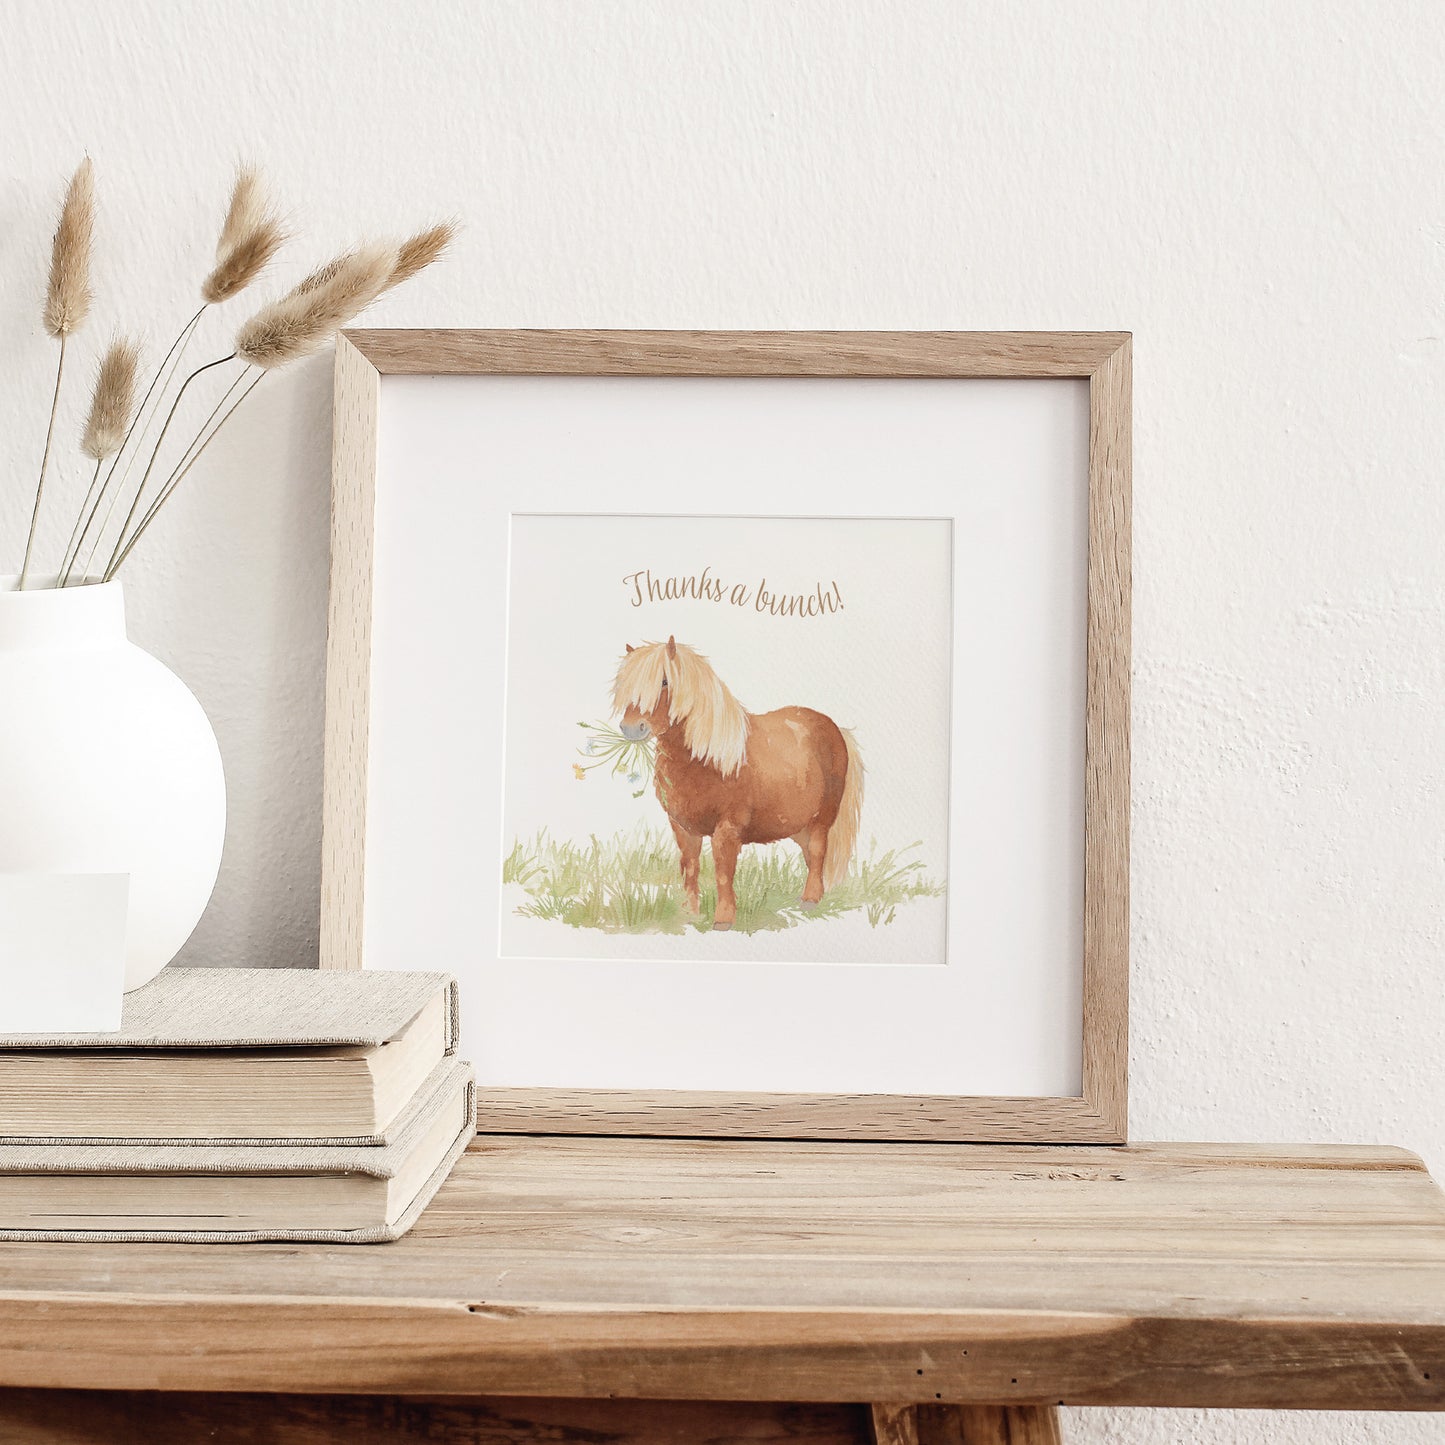 A greetings card displayed as an art print in a neutral coloured frame propped up on a bookshelf. The greetings card reads Thanks a Bunch in brown text above a chestnut Shetland pony holding a bunch of flowers in a watercolour style.